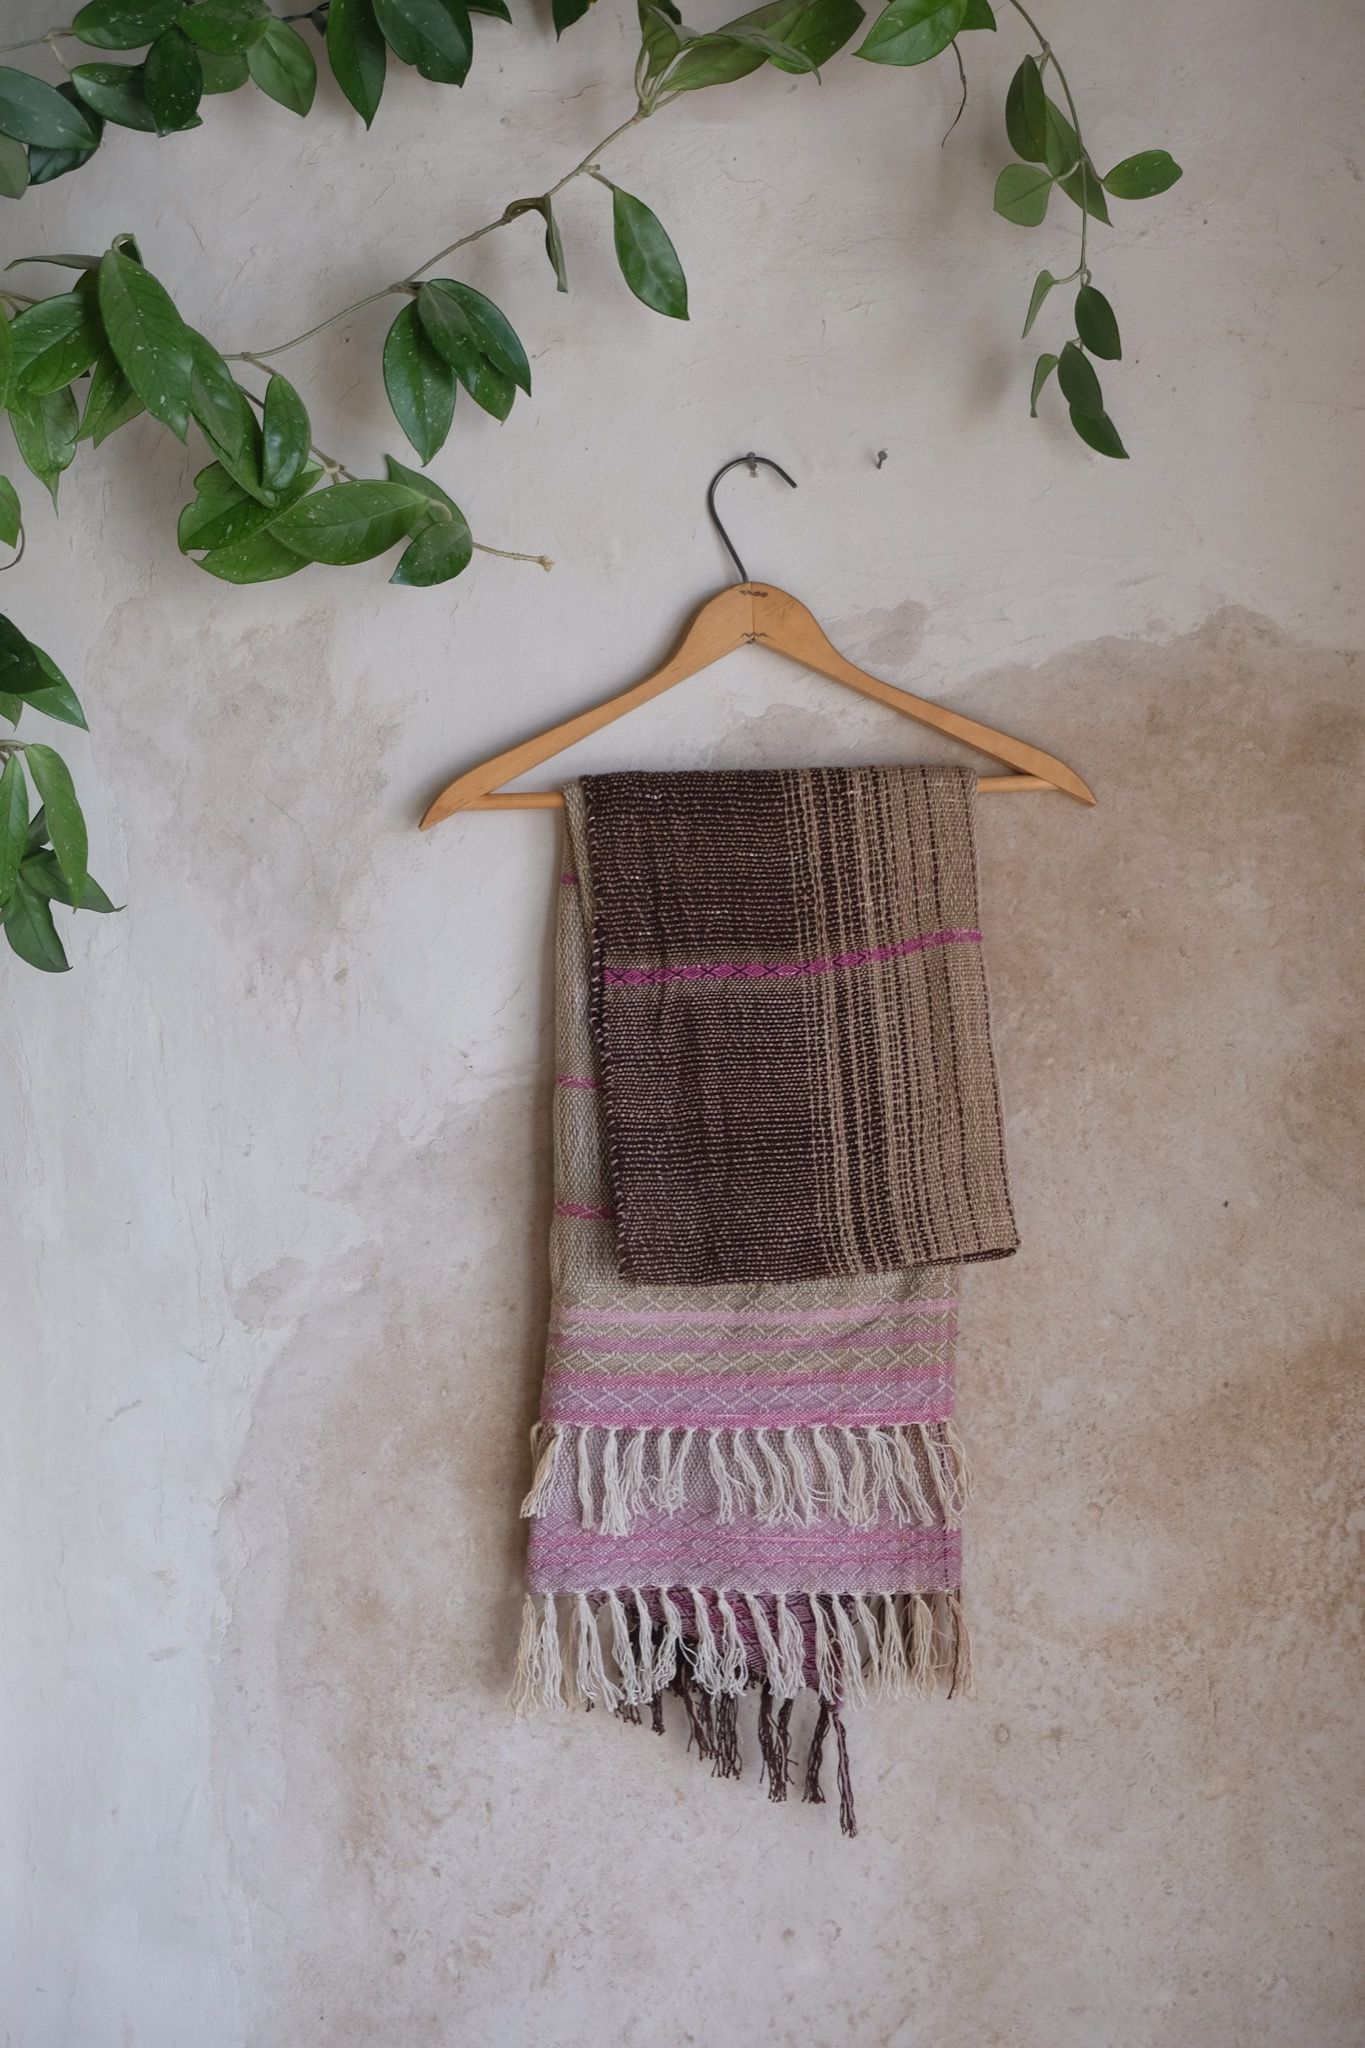 Naturally dyed brown, pink and purple handwoven scarf on hanger